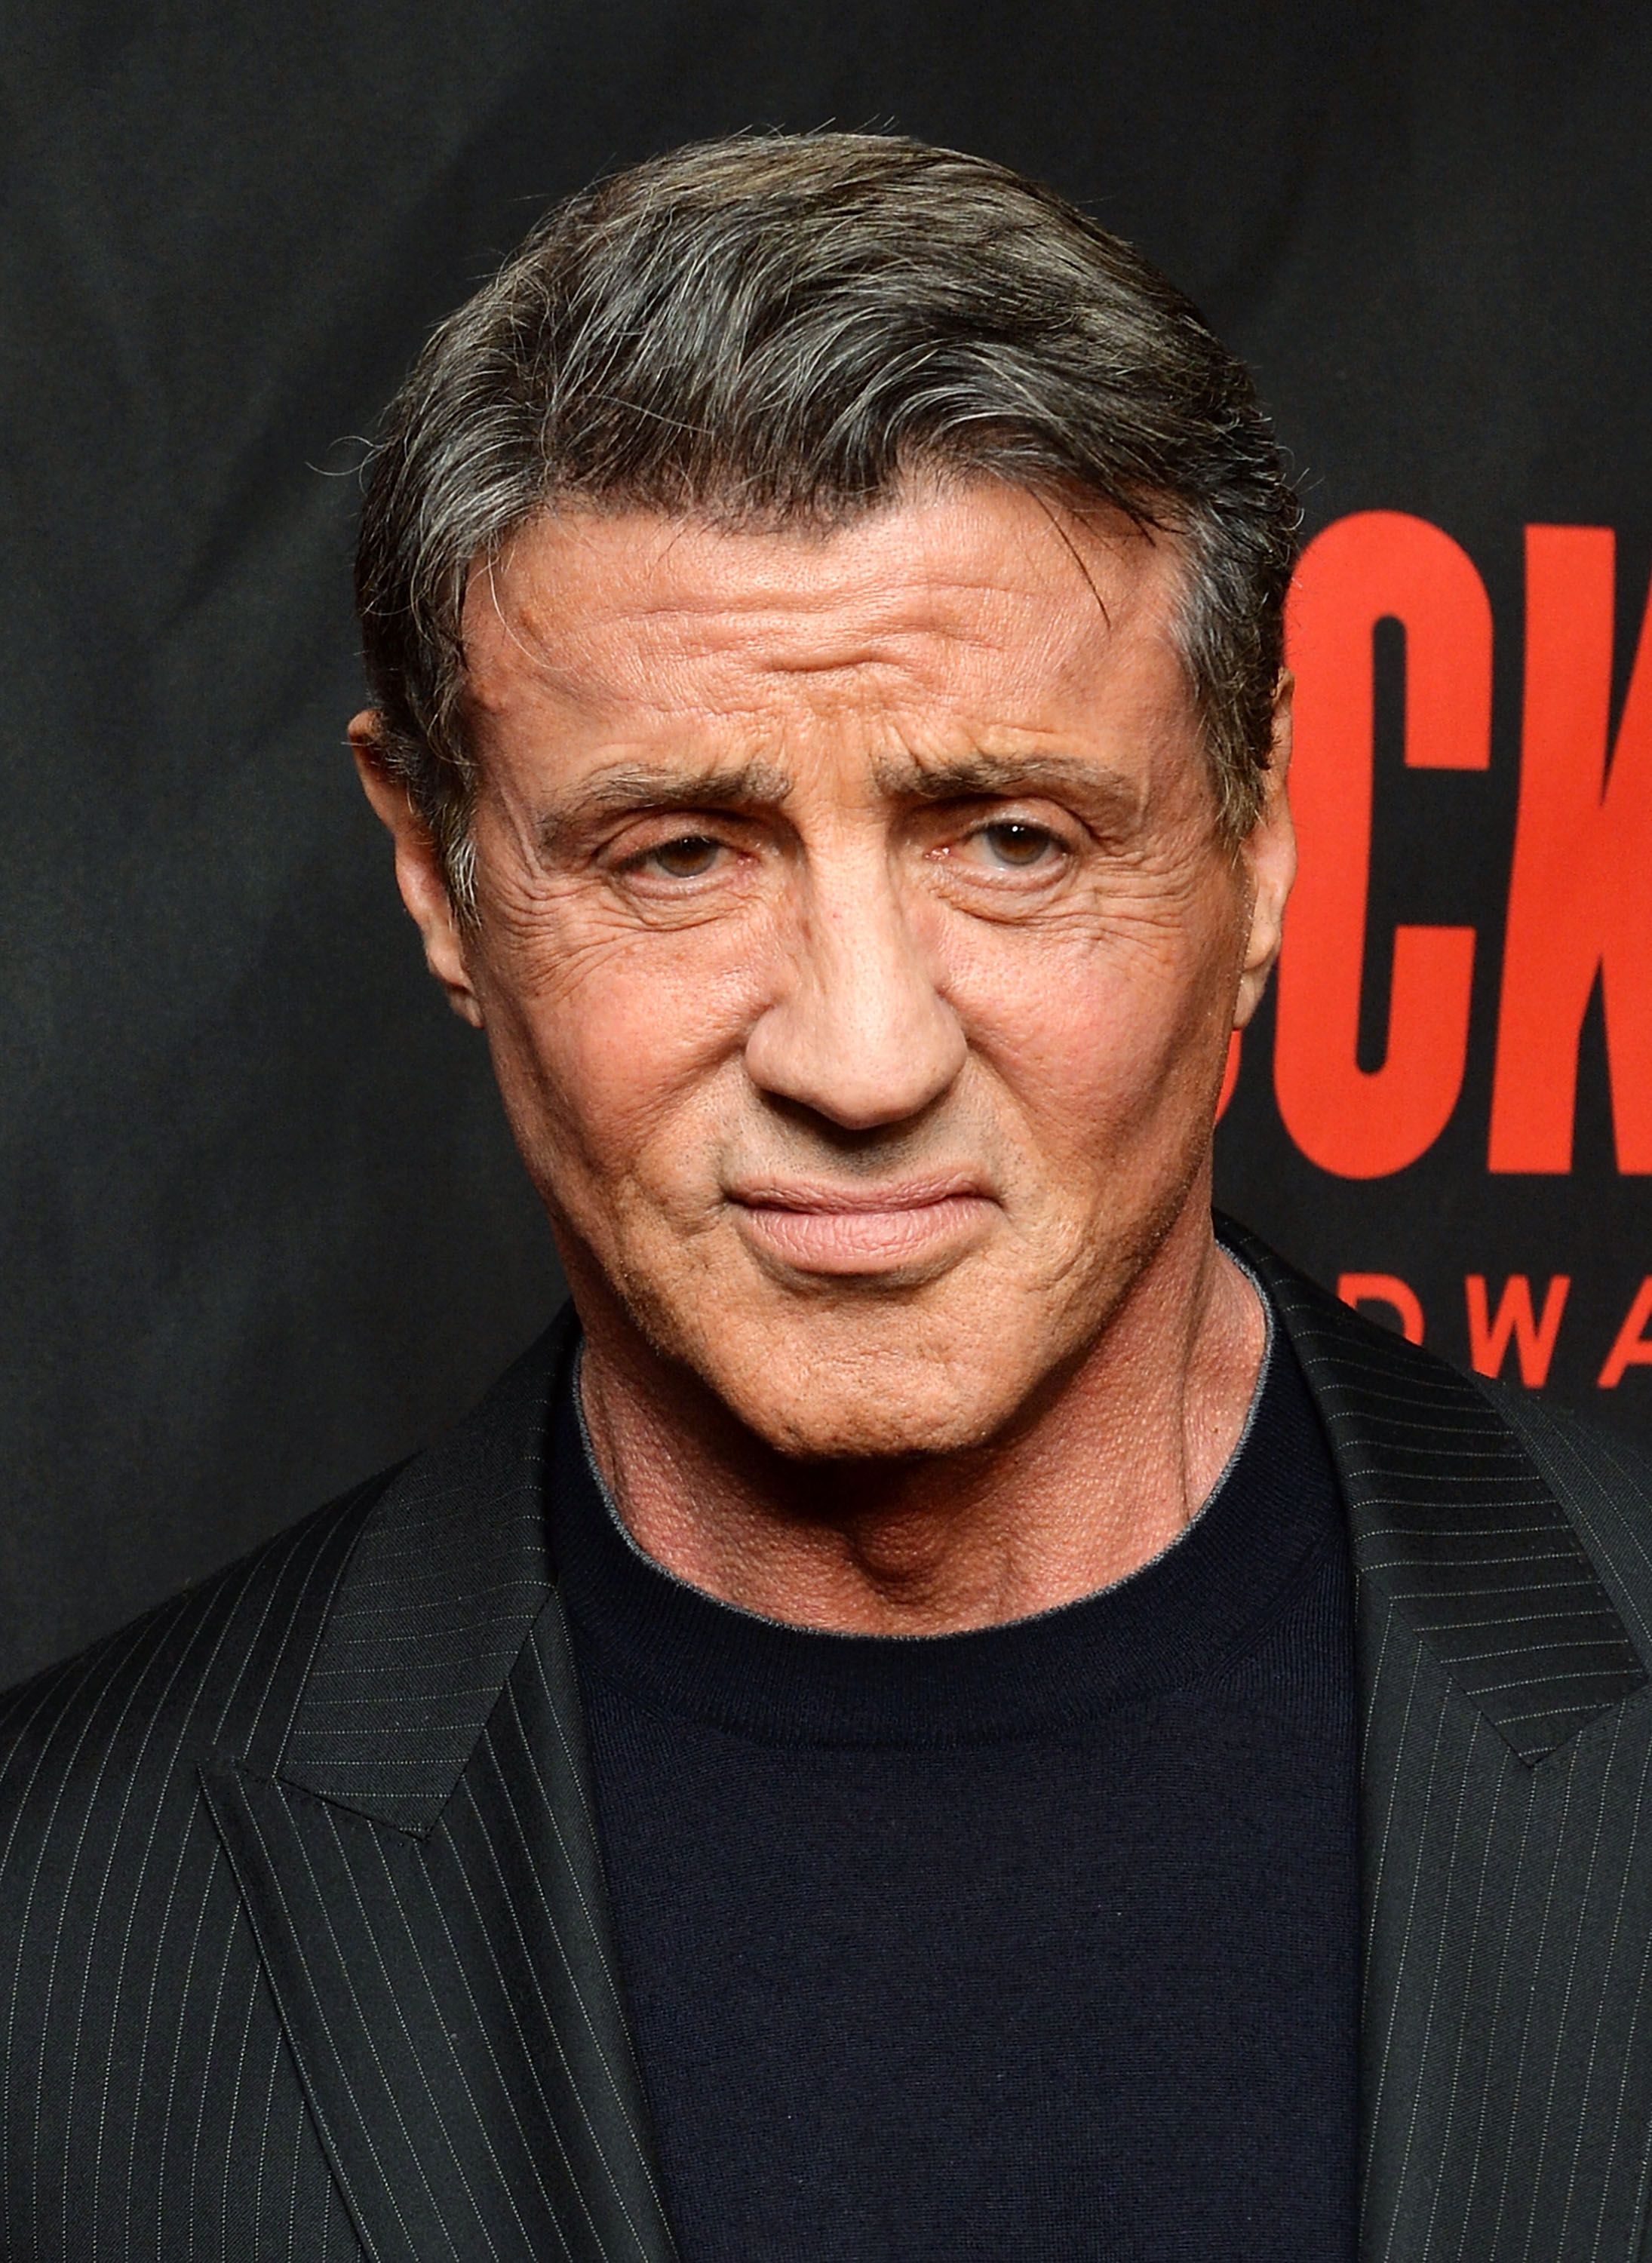  Sylvester Stallone at the "Rocky" Broadway opening night after party at Roseland Ballroom on March 13, 2014 in New York City. | Source: Getty Images